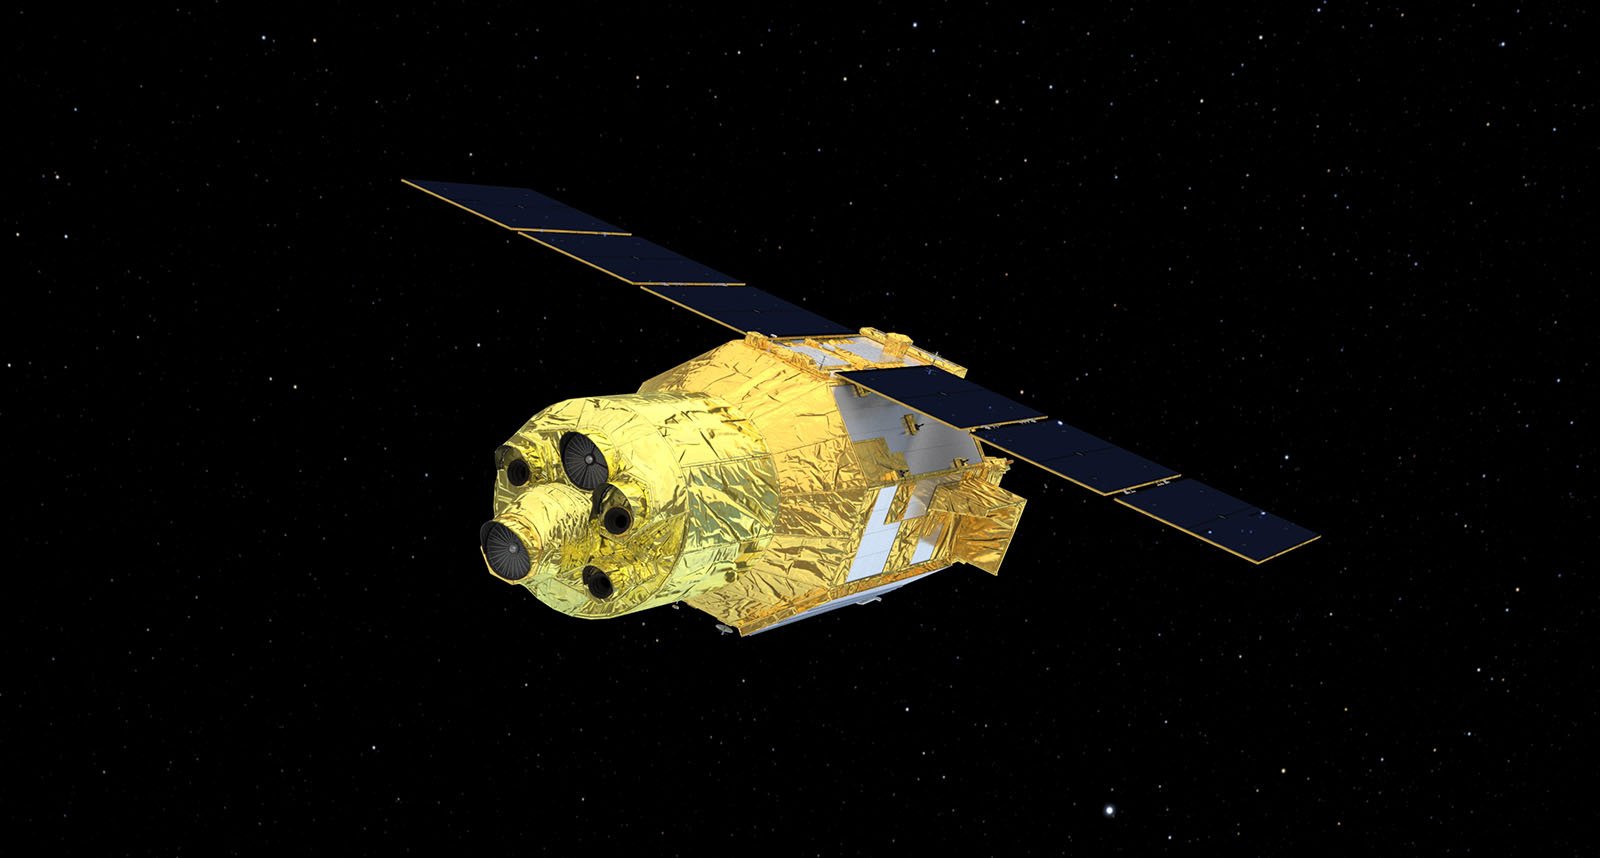 A digital illustration of a gold-colored satellite with large solar panels on each side, moving through space against a starry black background.